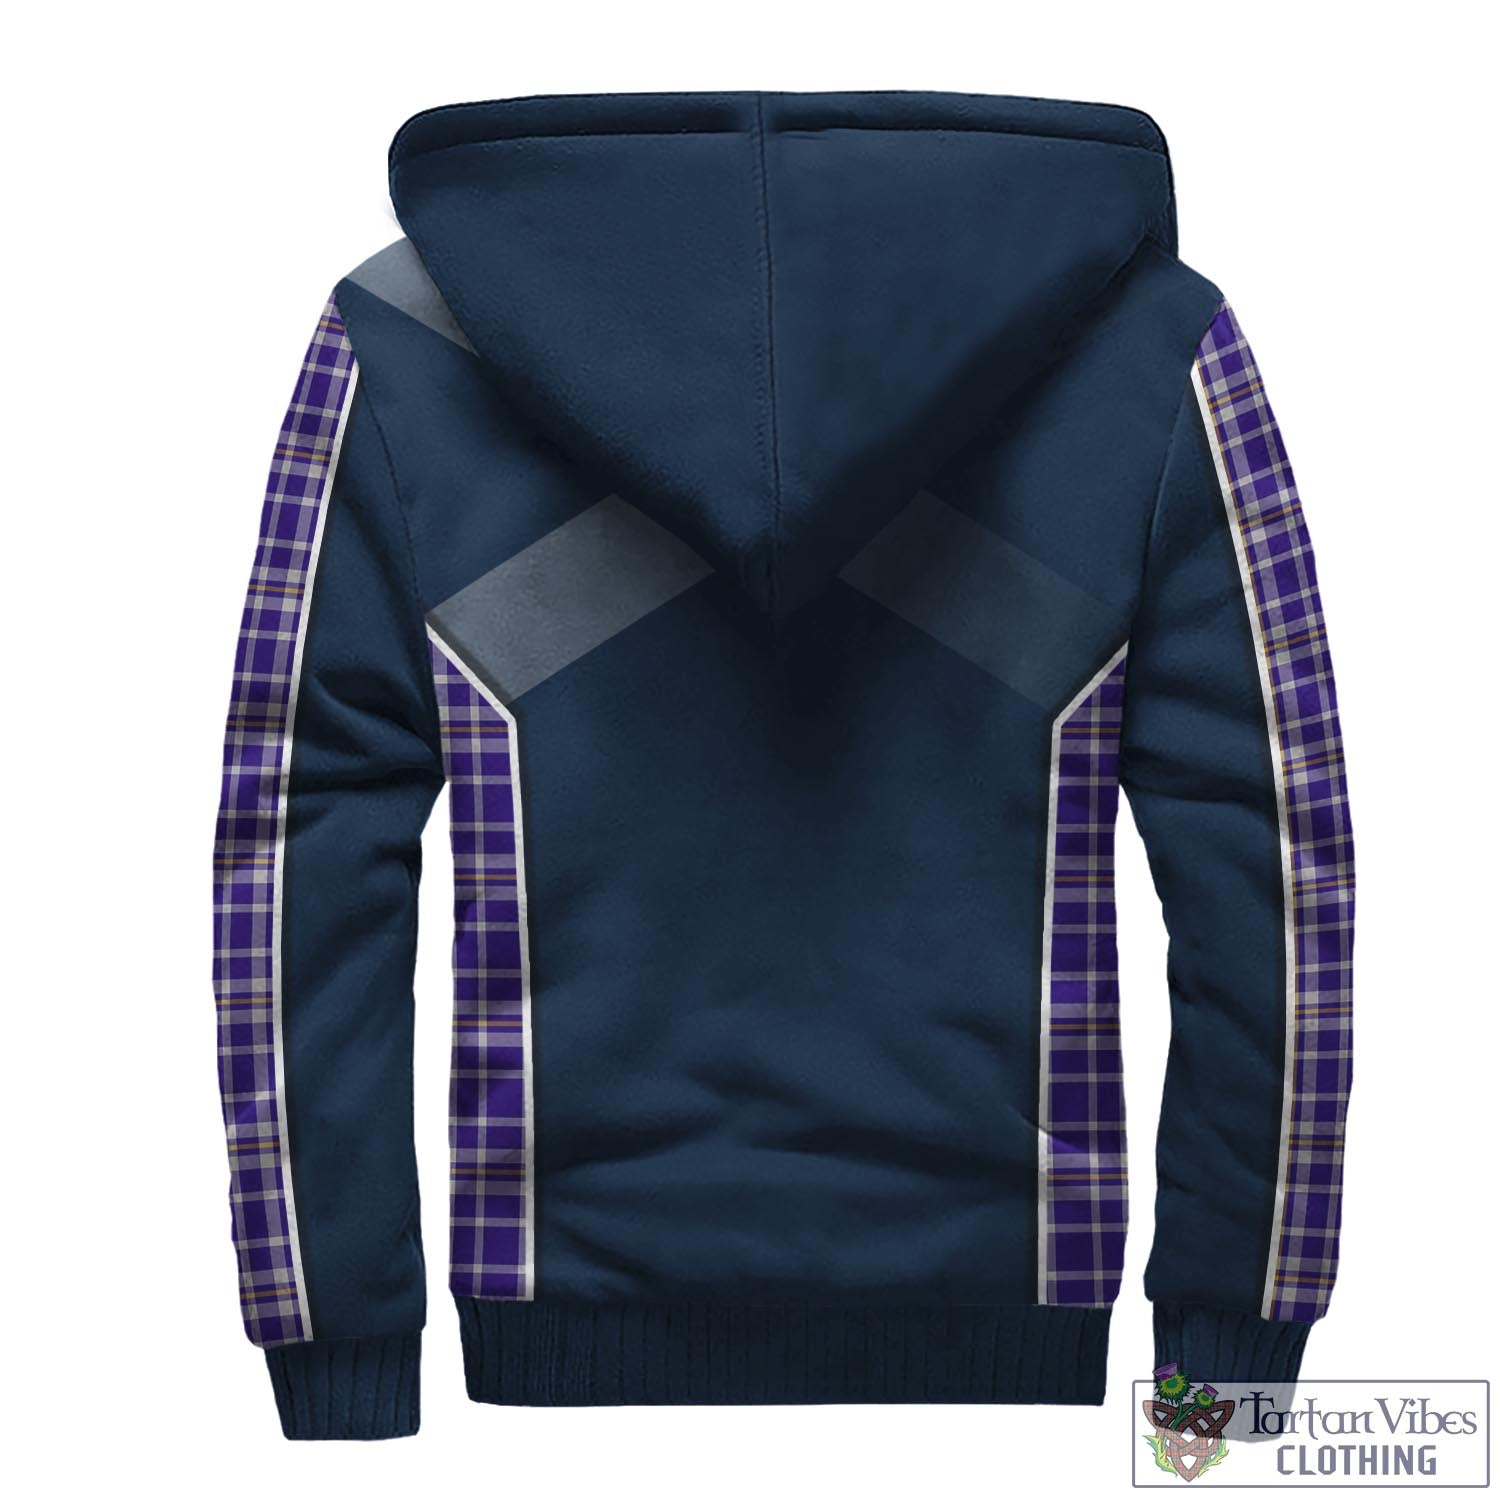 Tartan Vibes Clothing Ochterlony Tartan Sherpa Hoodie with Family Crest and Scottish Thistle Vibes Sport Style